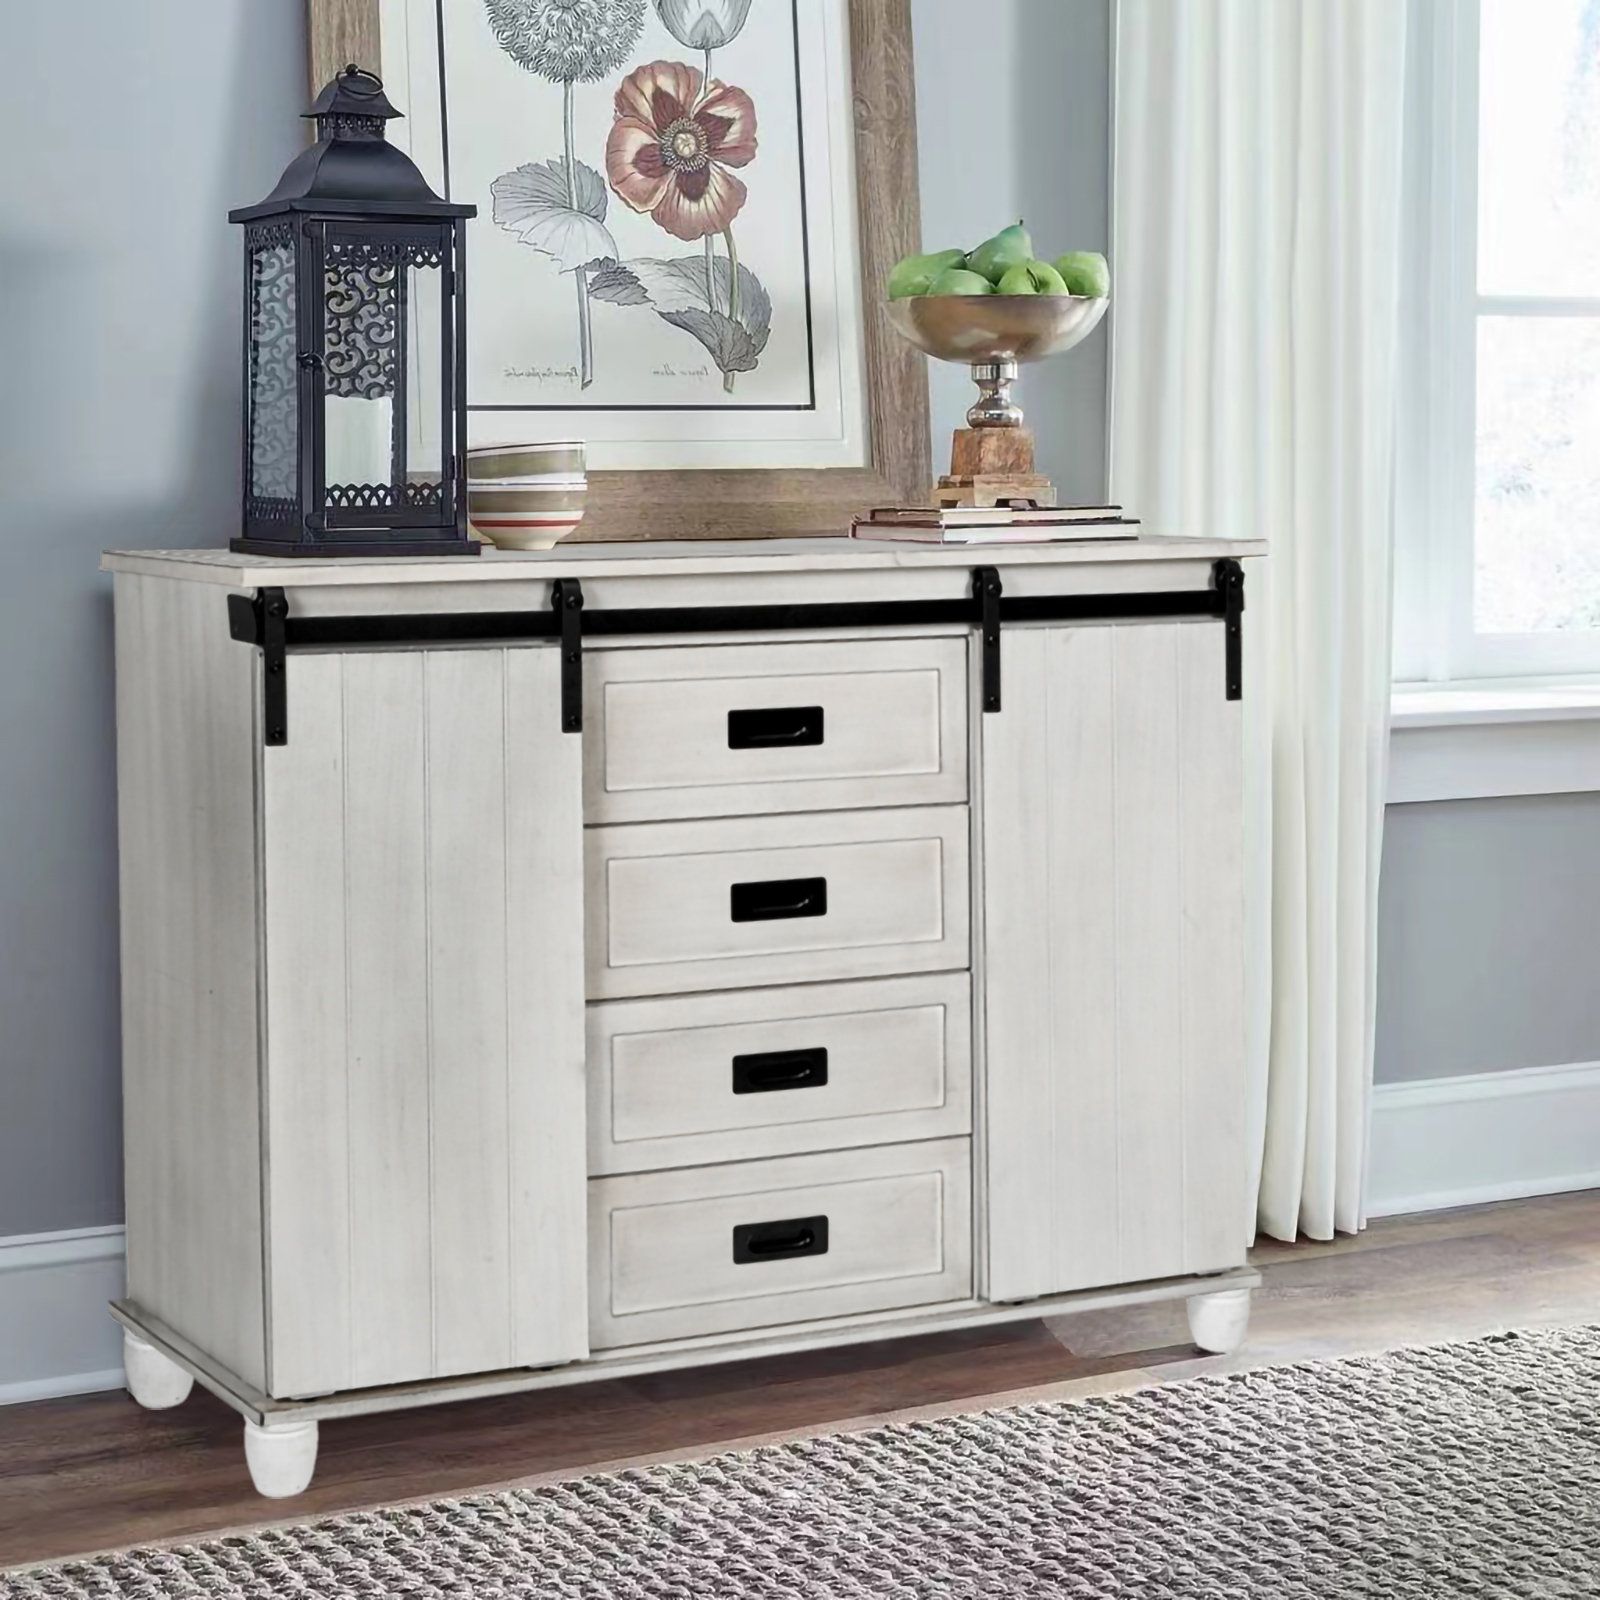 Sideboards Double Barn Door Buffet Throughout Newest Gracie Oaks Redgate 45" Wide White Storage Cabinet Sideboard With 4 Drawers  And 2 Sliding Barn Doors & Reviews (View 9 of 15)